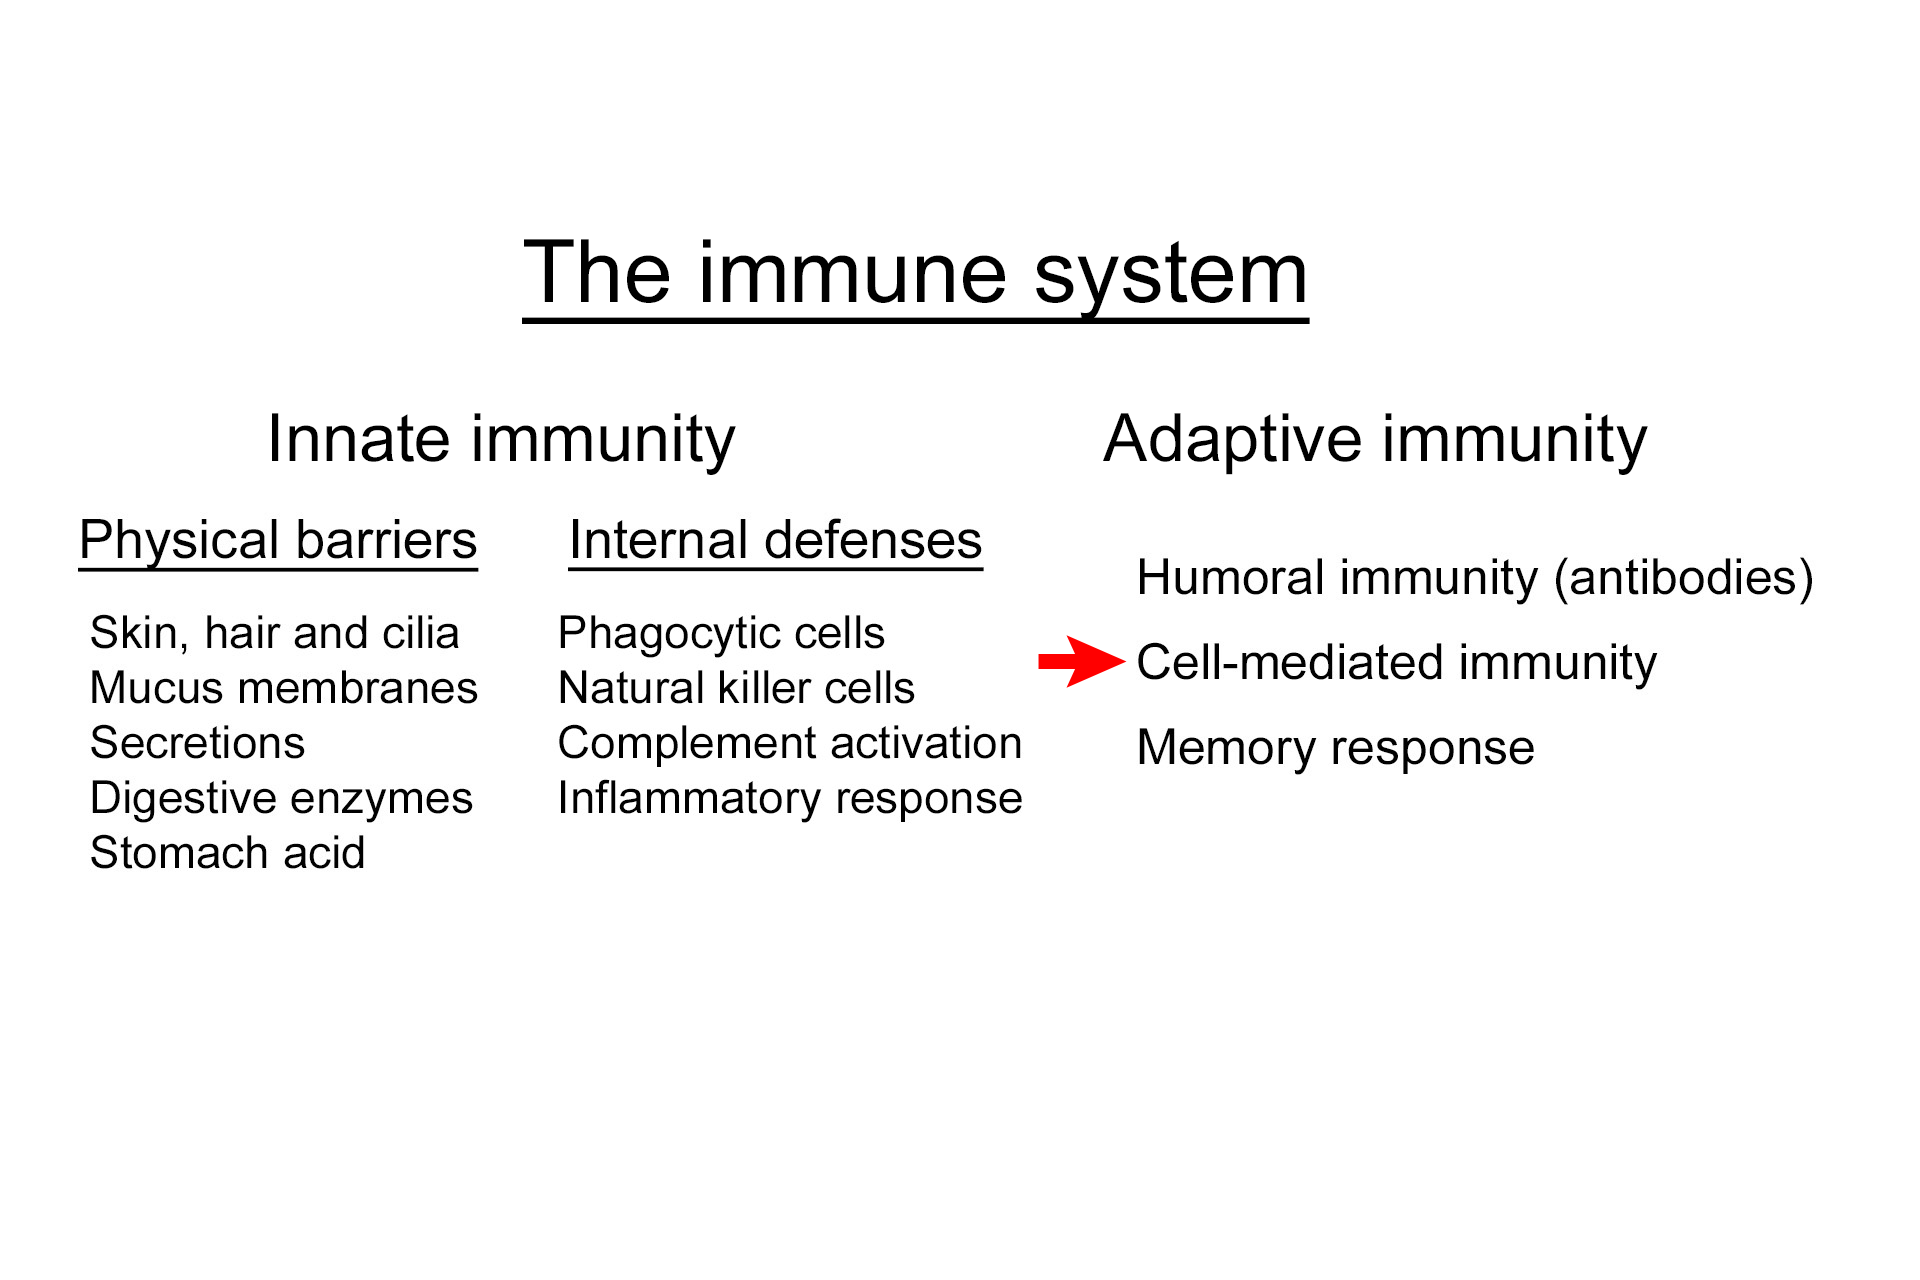  -- Cellular immunity > <p>Cellular immunity entails the activation of T cells that can react against a foreign antigen present on the surface of a cell.  T cells are capable of killing virus-infected host cells as well as transformed cancer cells.  Additionally, T cell activation can lead to the production of signaling molecules that activate macrophages to destroy invading microbes.</p>
